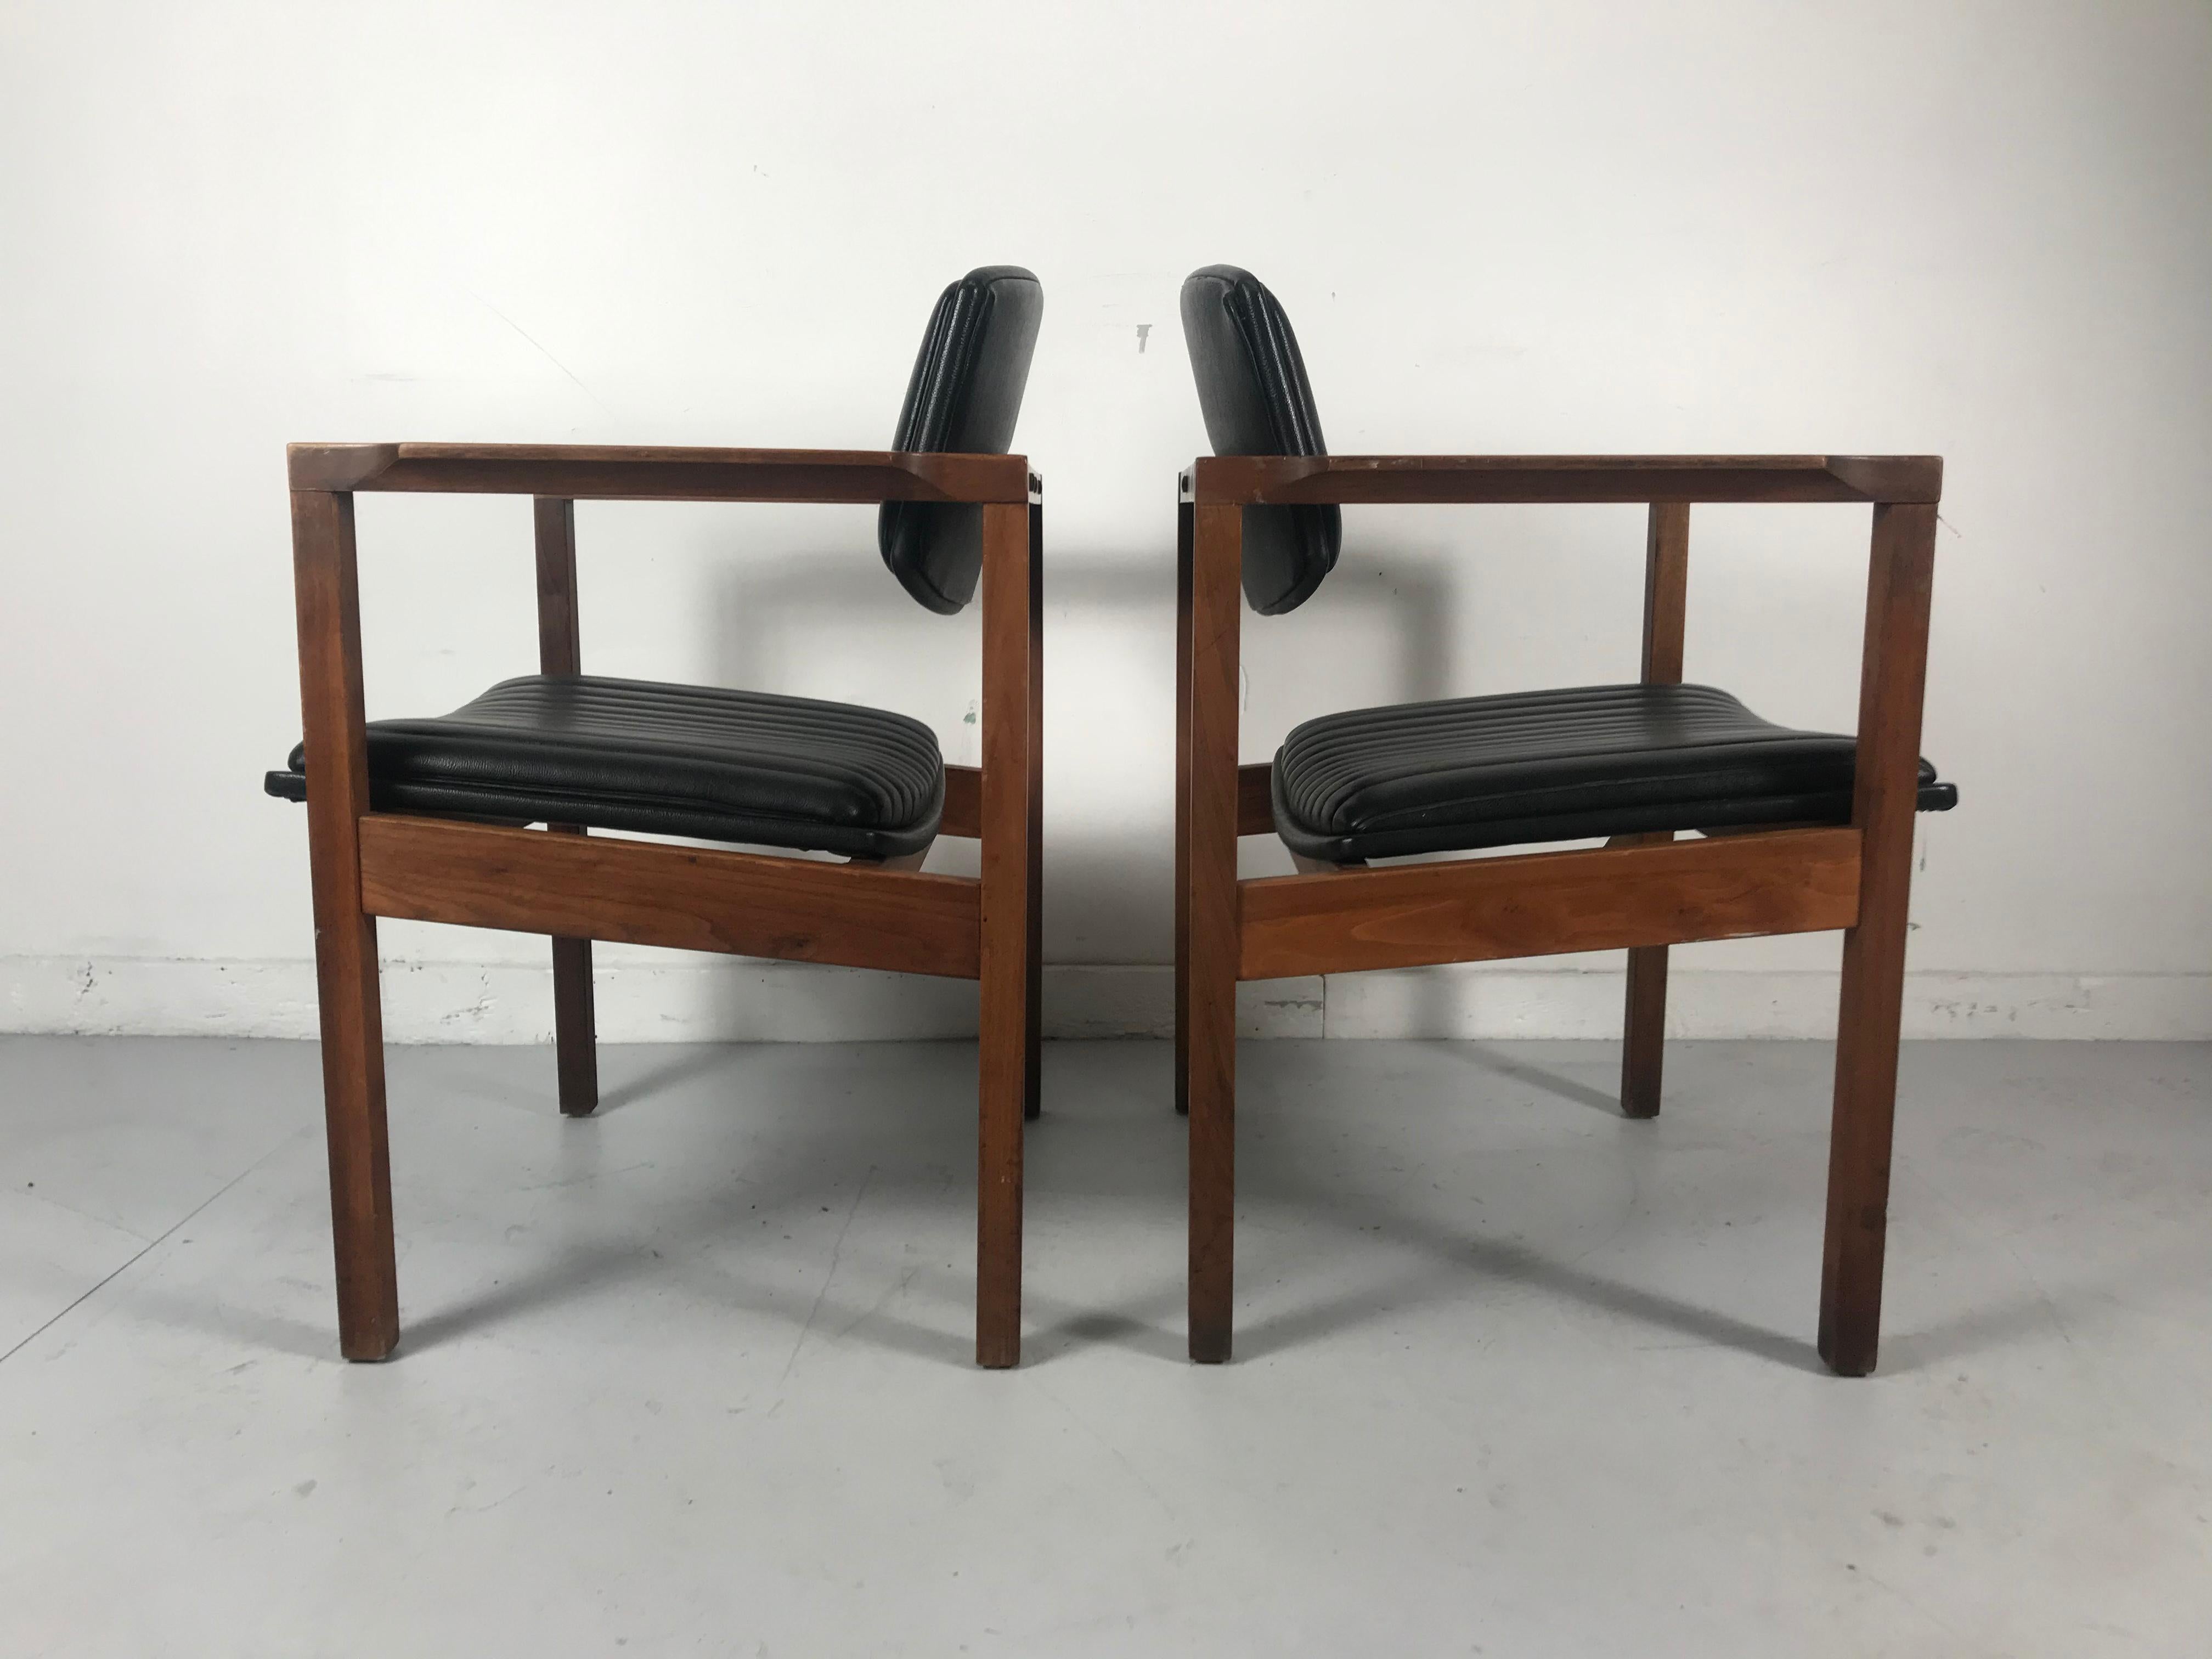 Mid-20th Century Pair Modernist Walnut and Channeled Naugahyde Lounge Chairs Attr. to Jens Risom For Sale